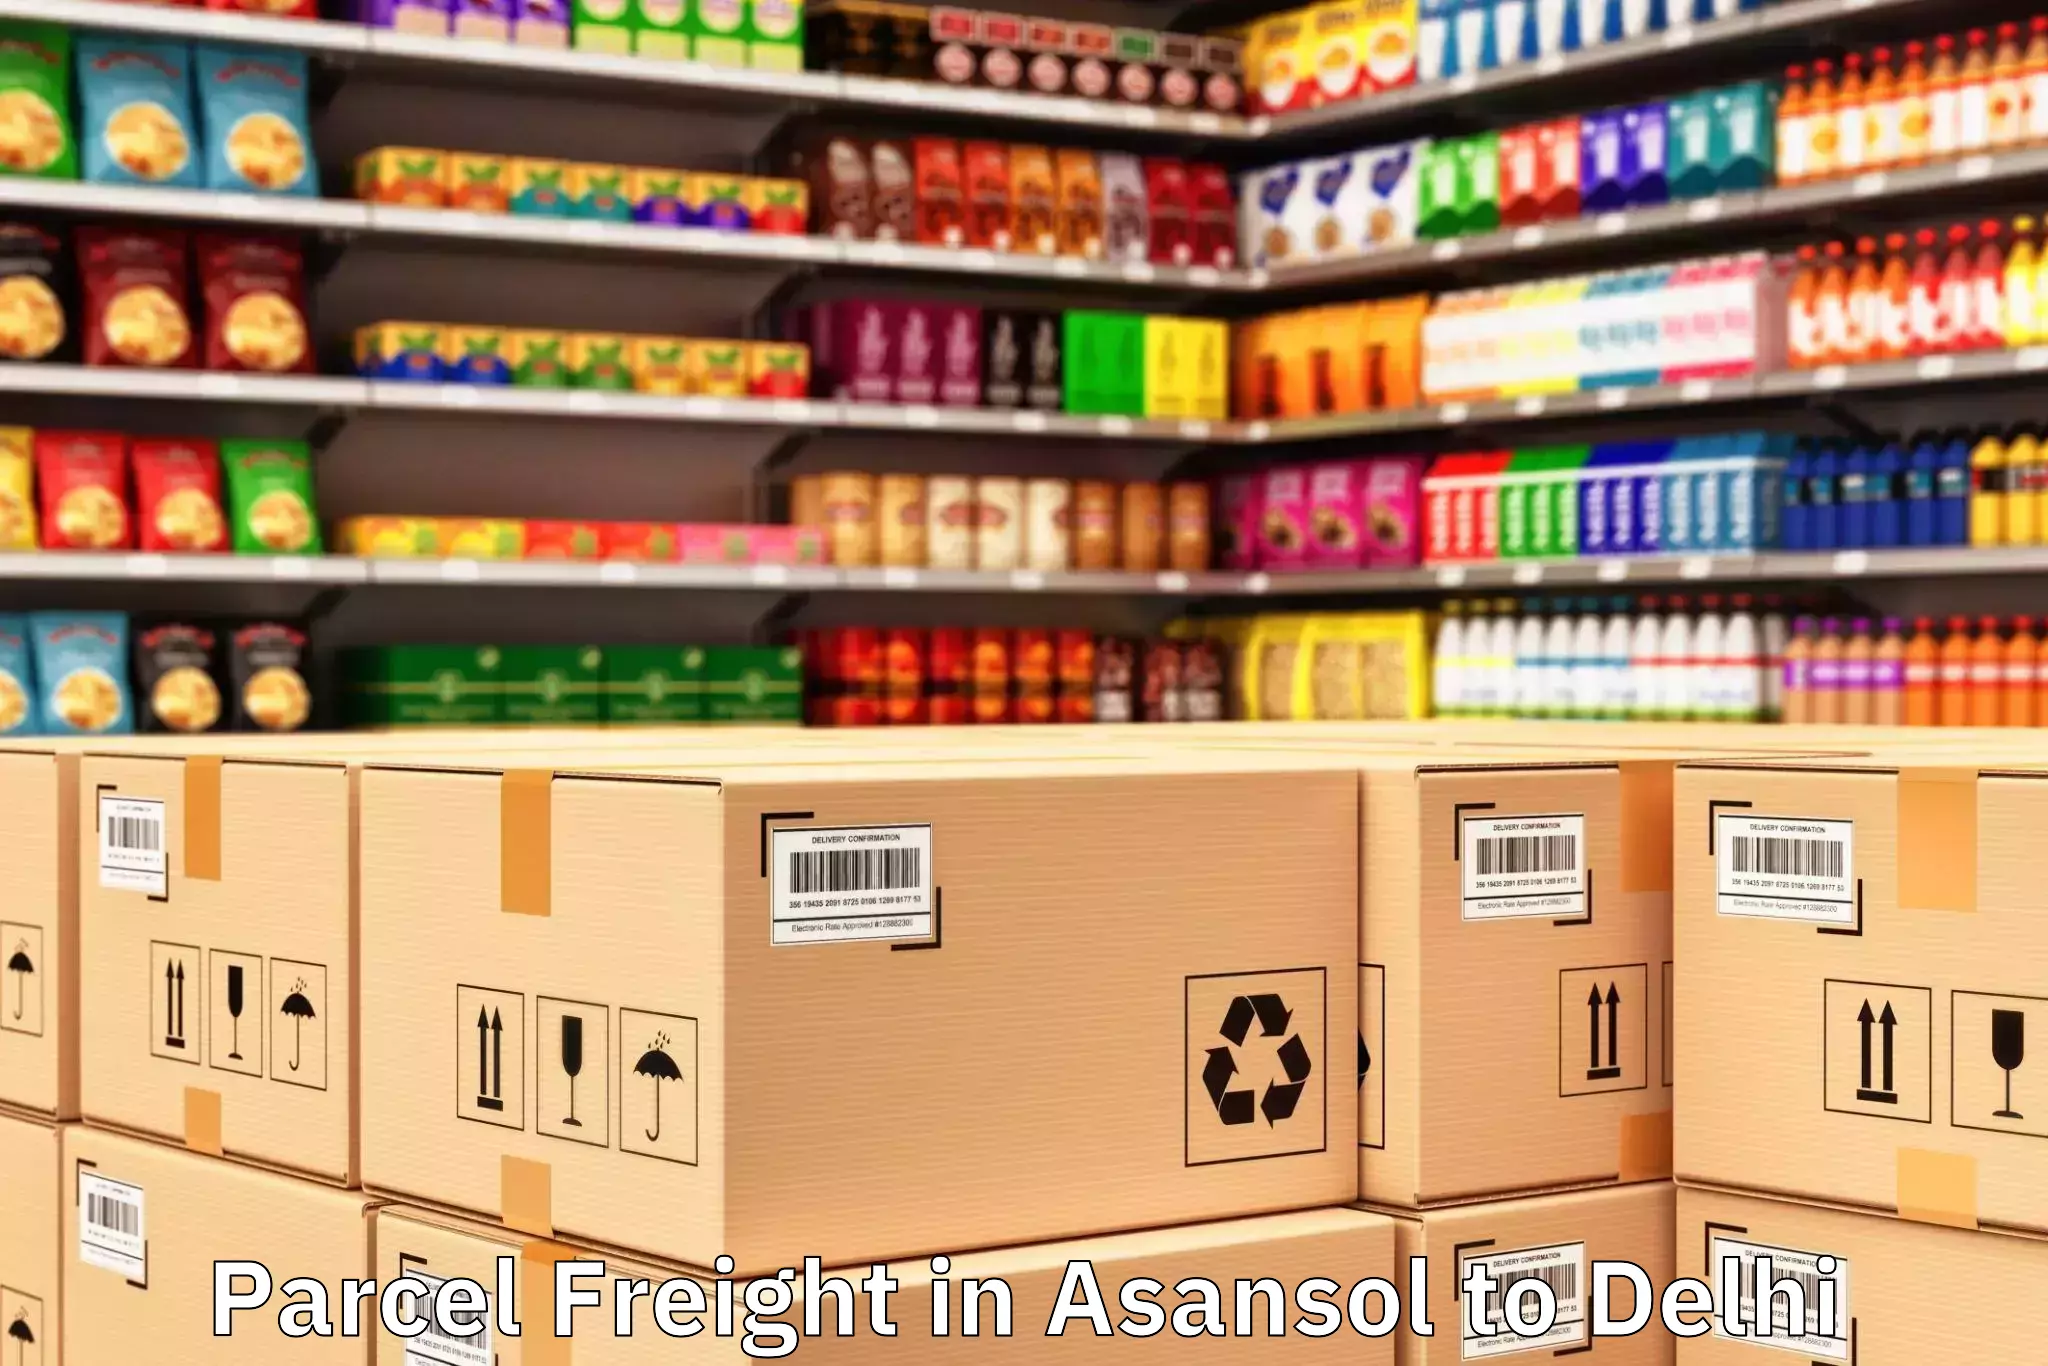 Professional Asansol to Indian Institute Of Technology Delhi New Delhi Parcel Freight